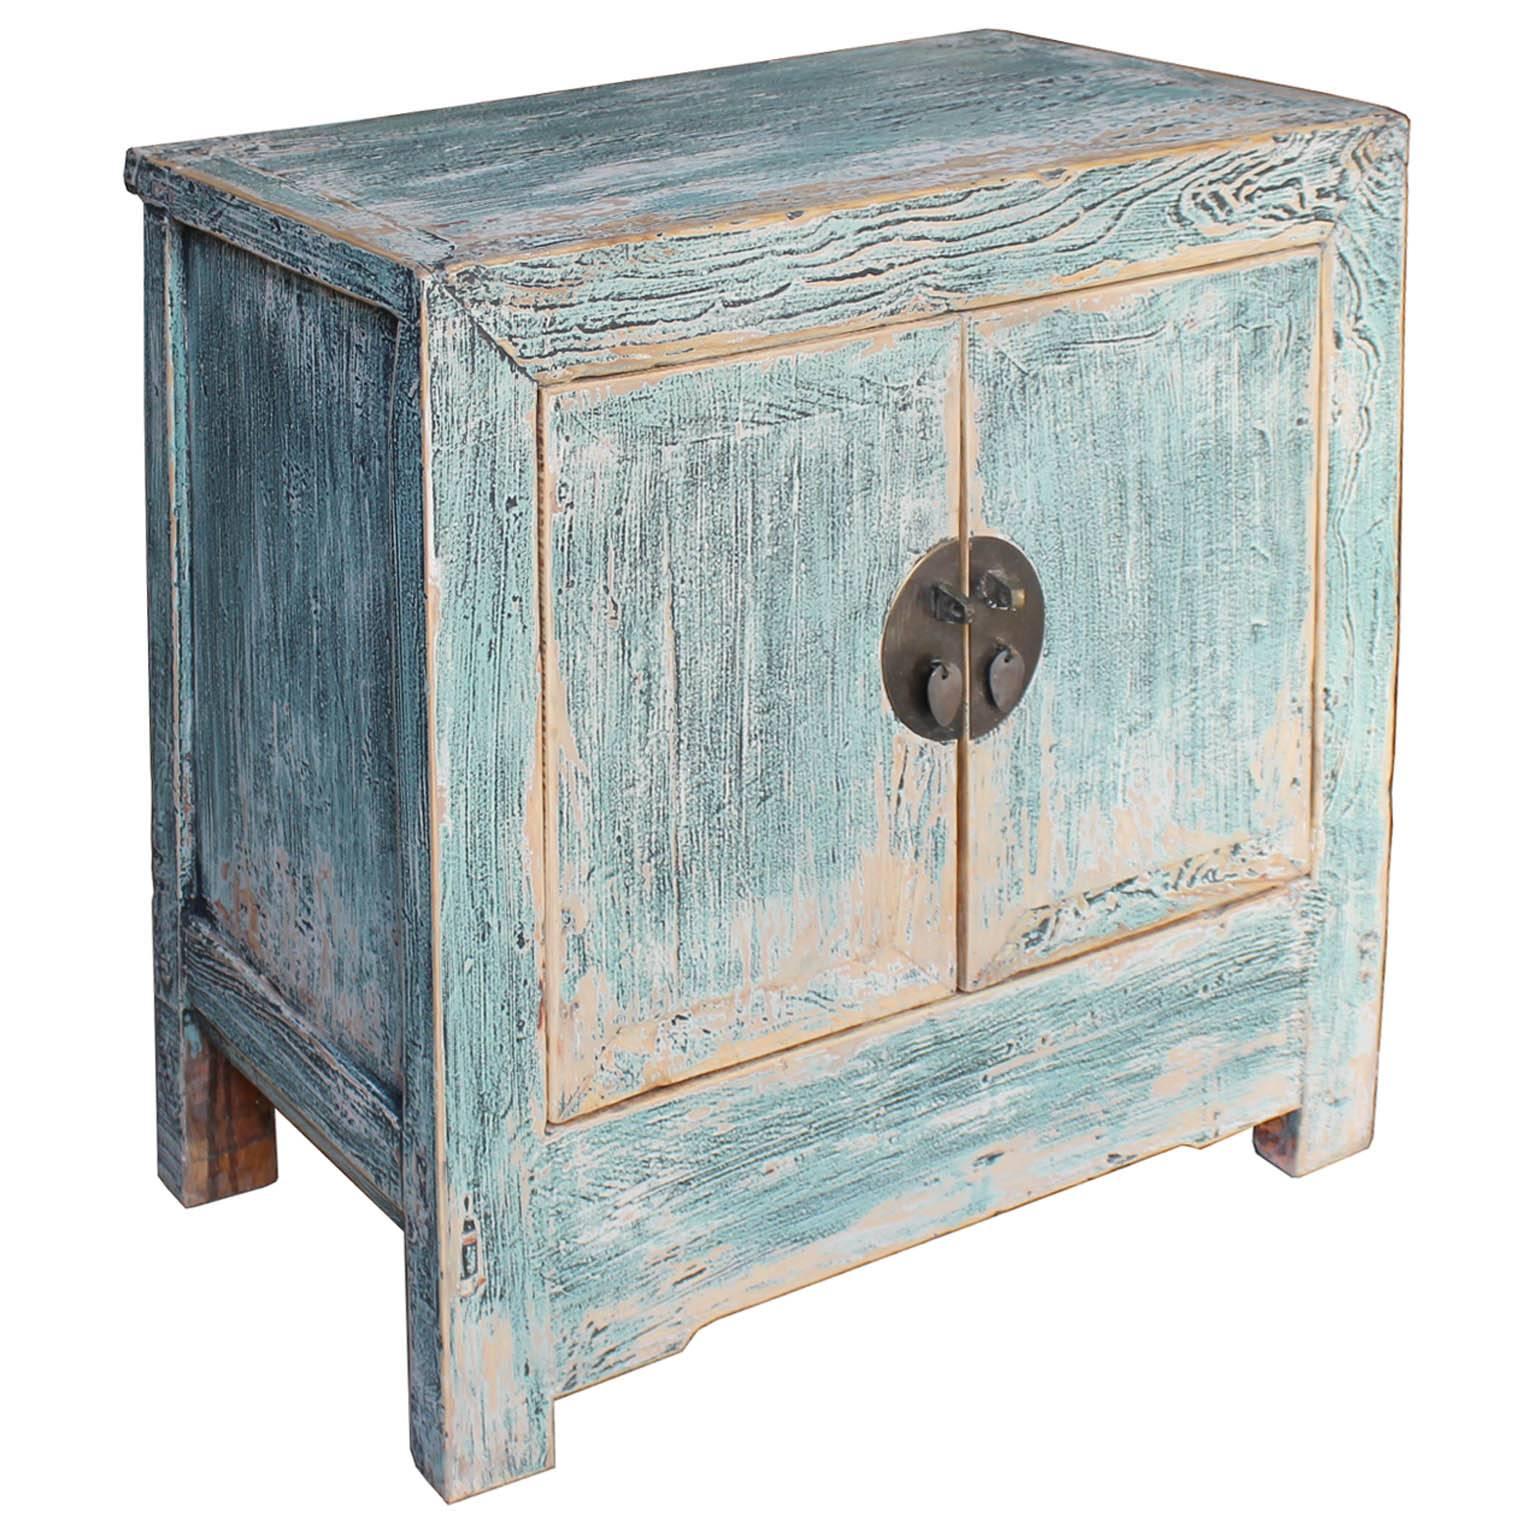 Classic Beijing chest refinished in light green/blue dry finish.  Use in the bedroom or as an entryway piece. New shelf and hardware, circa 1920s.